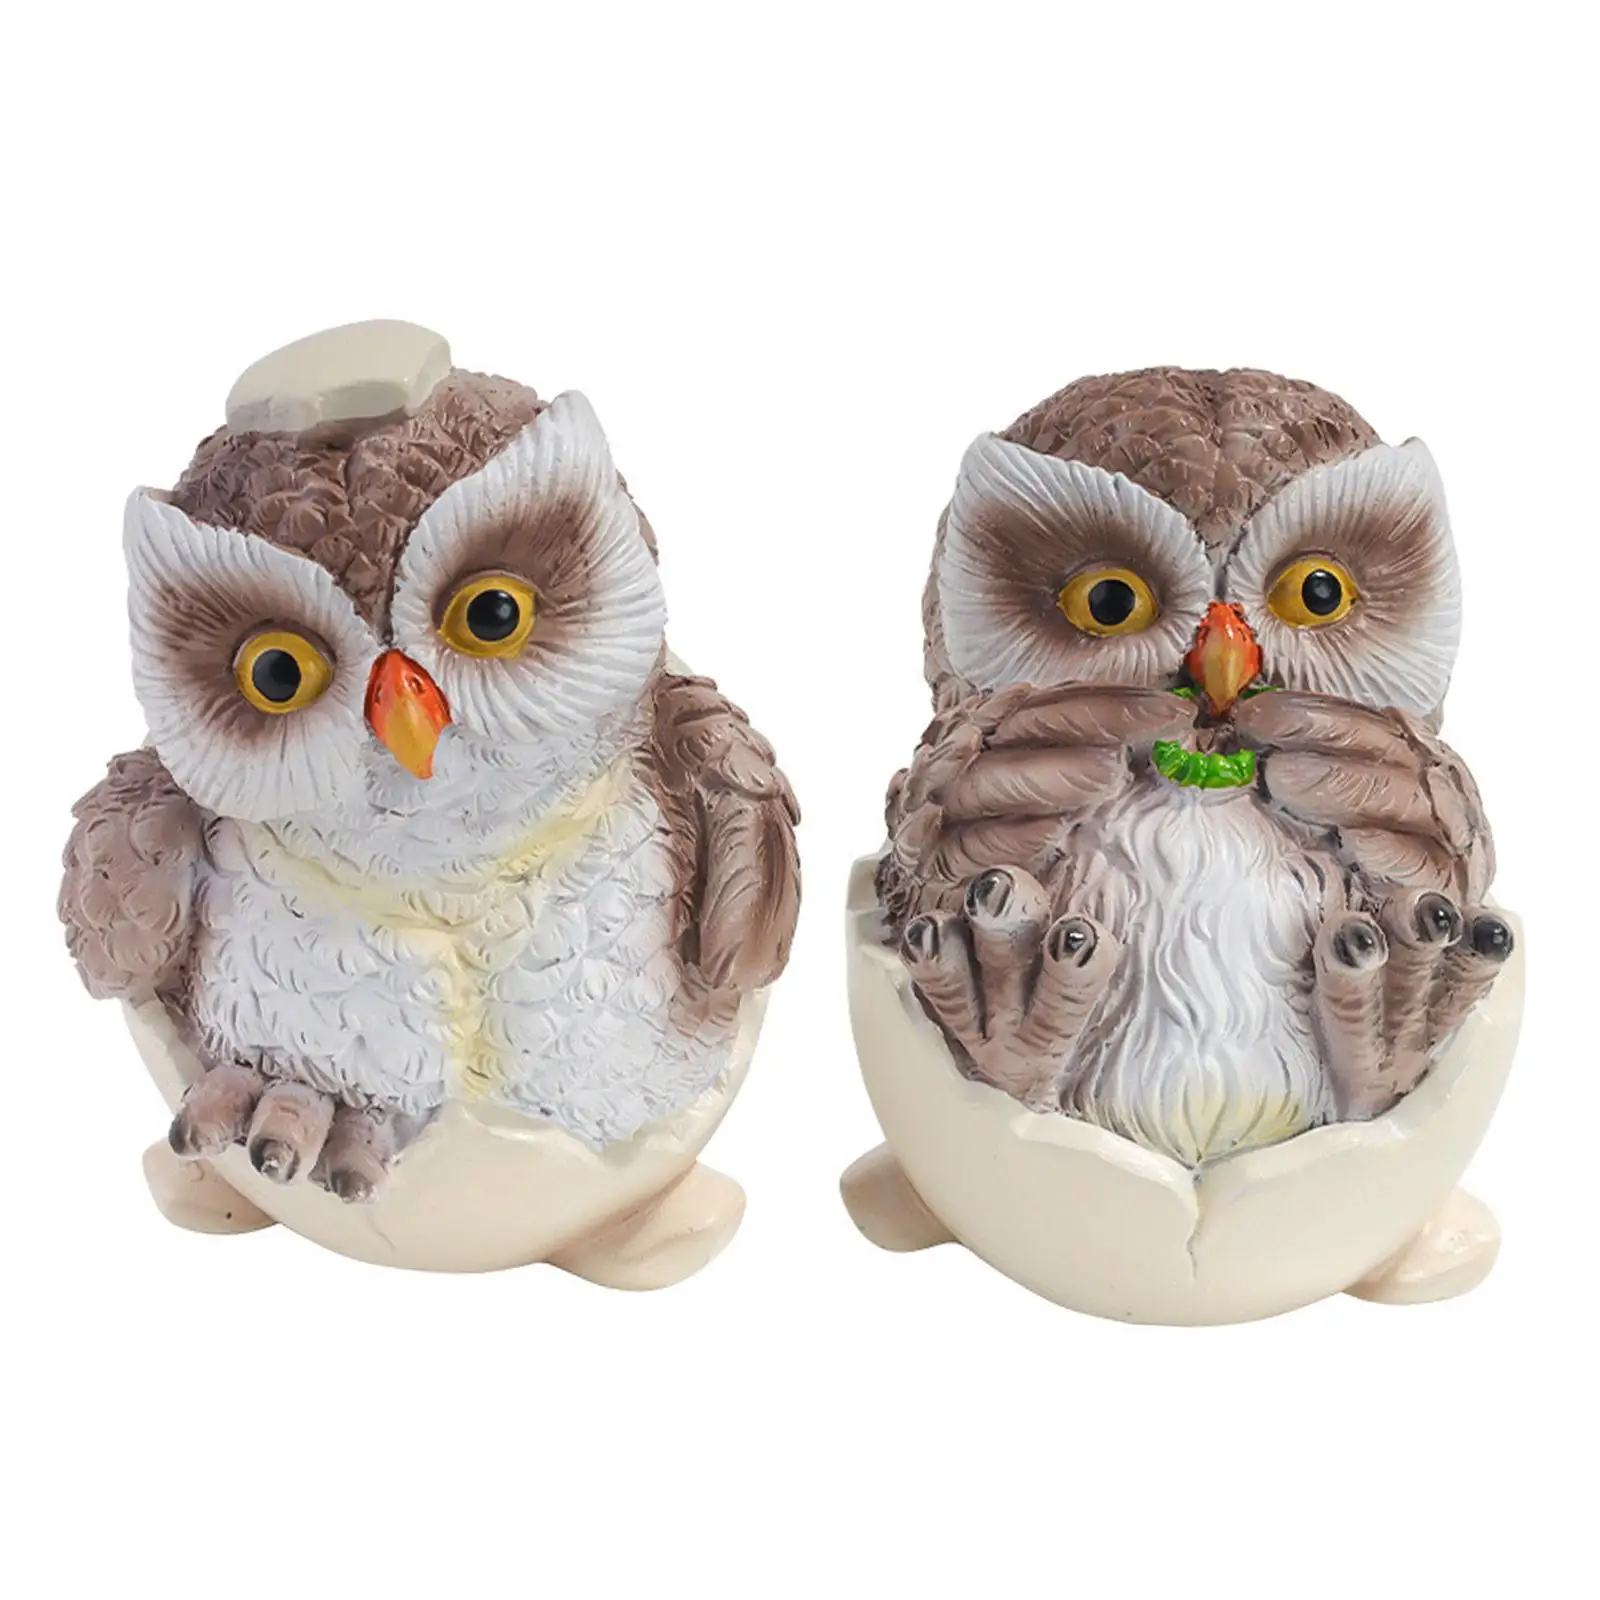 2Pcs Creative Owl Statues Figurines Decoration Decorative Gifts Works Ornament for Garden Office New Year